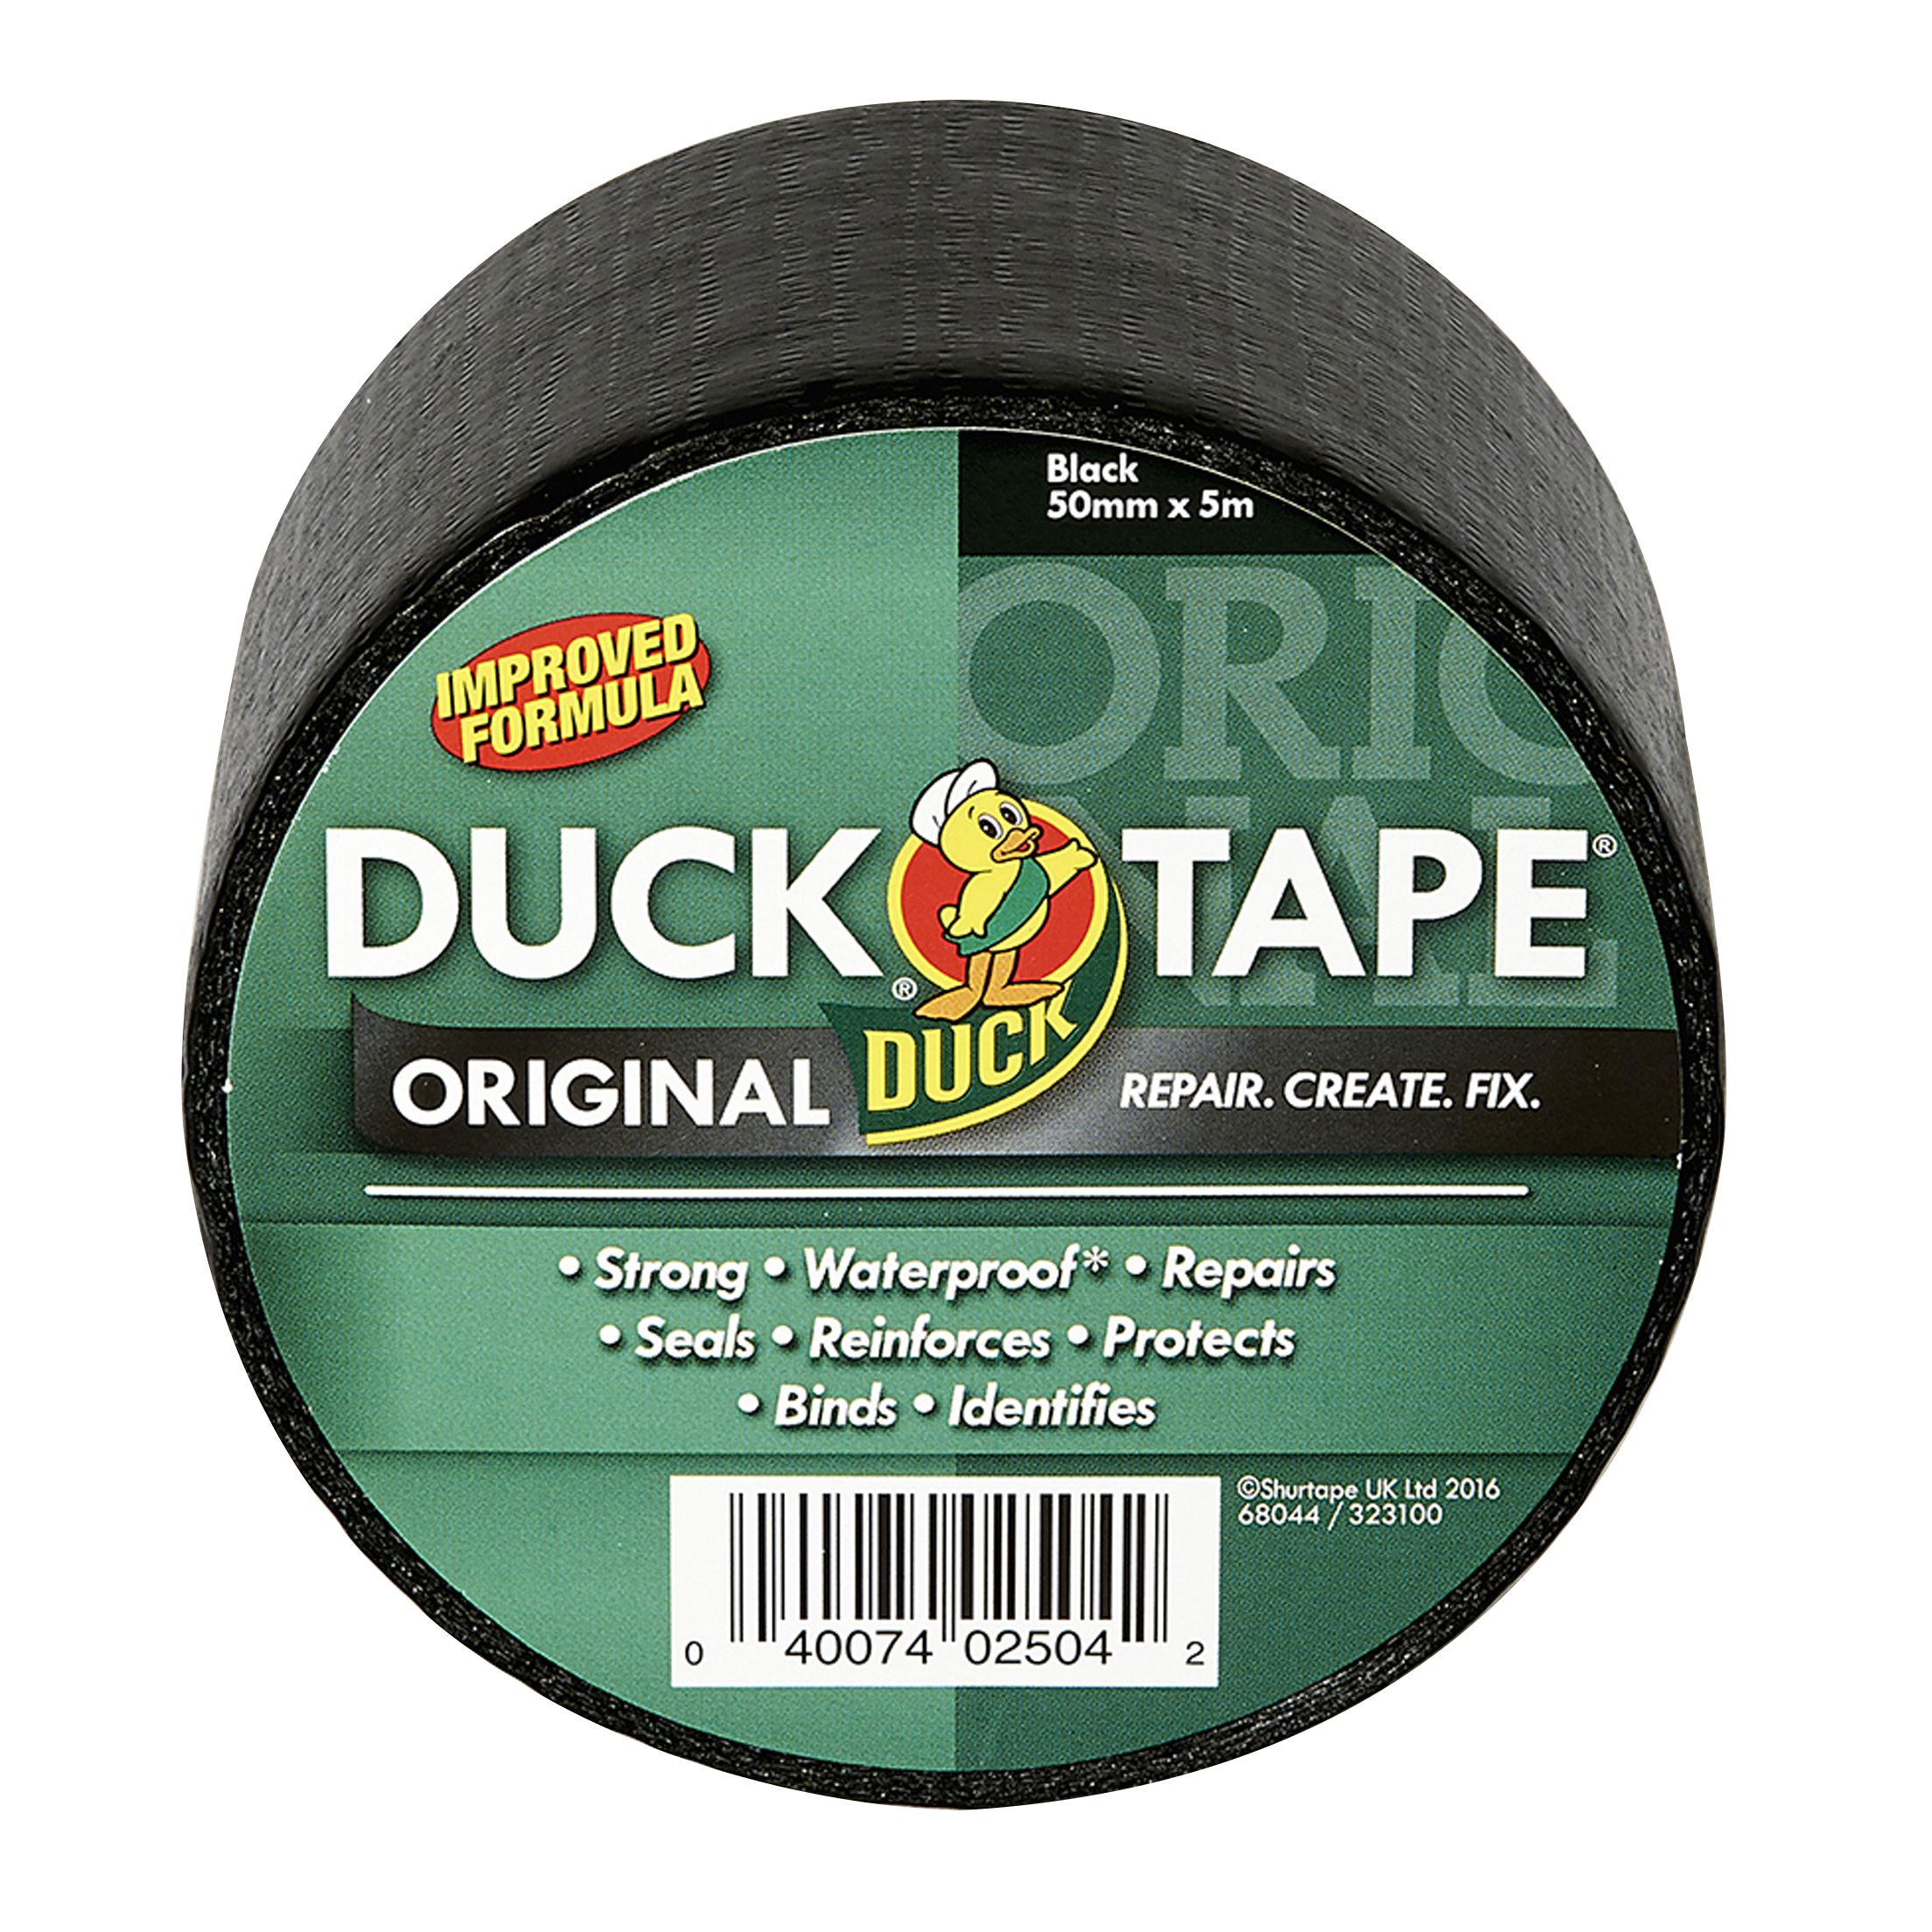 Ducktape My Design Tape, Delivery Near You